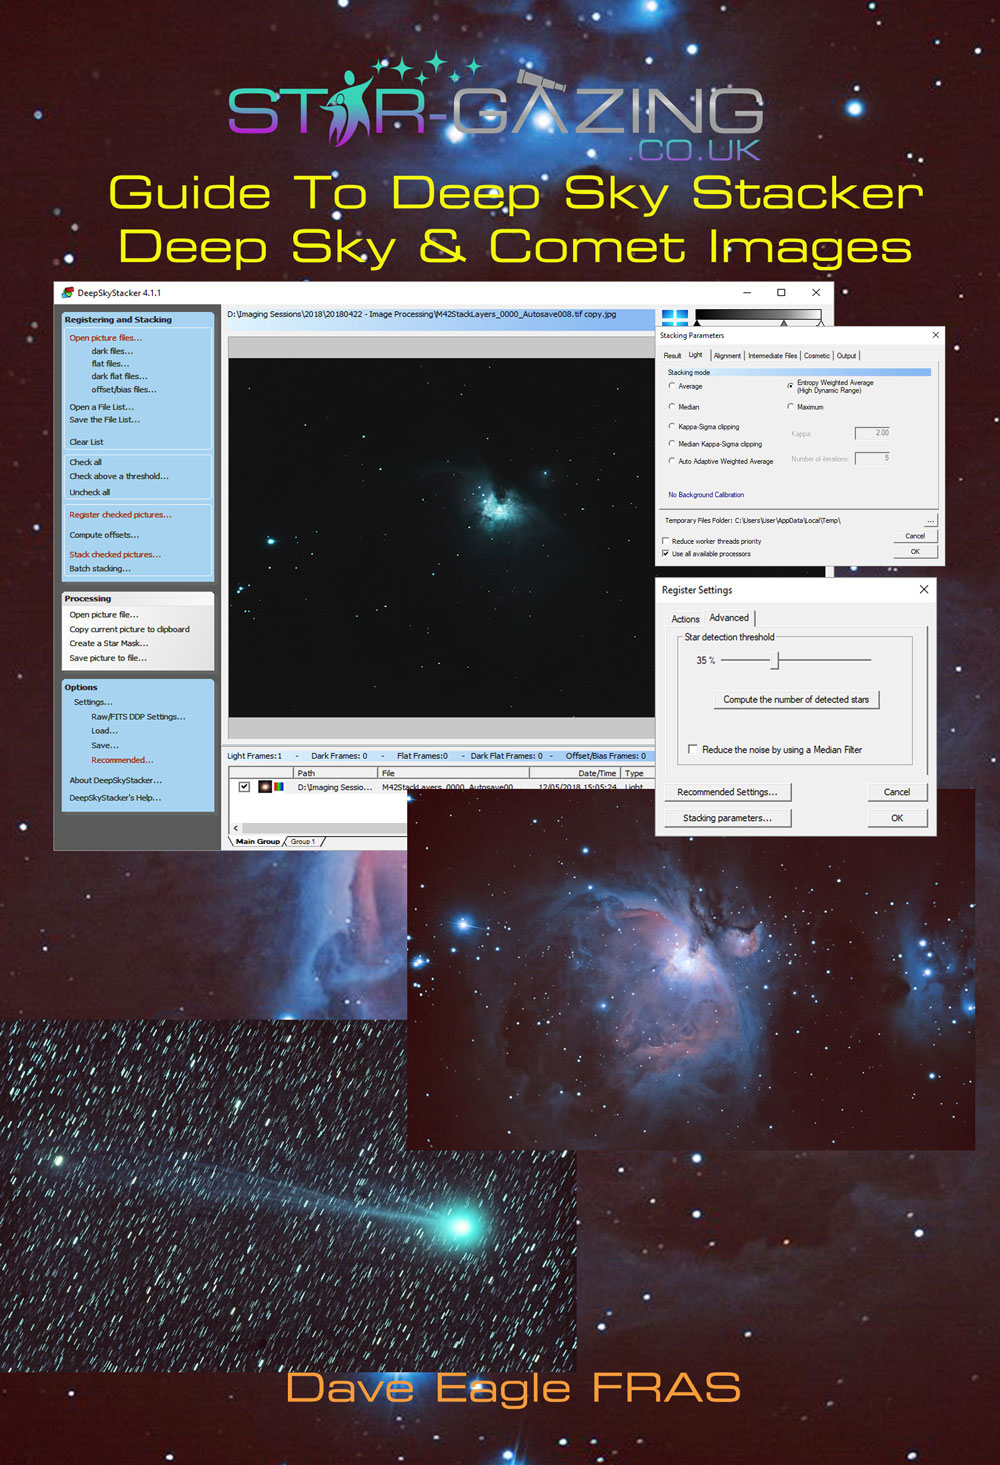 Star-gazing Guide to Stacking Images in Deep Sky Stacker